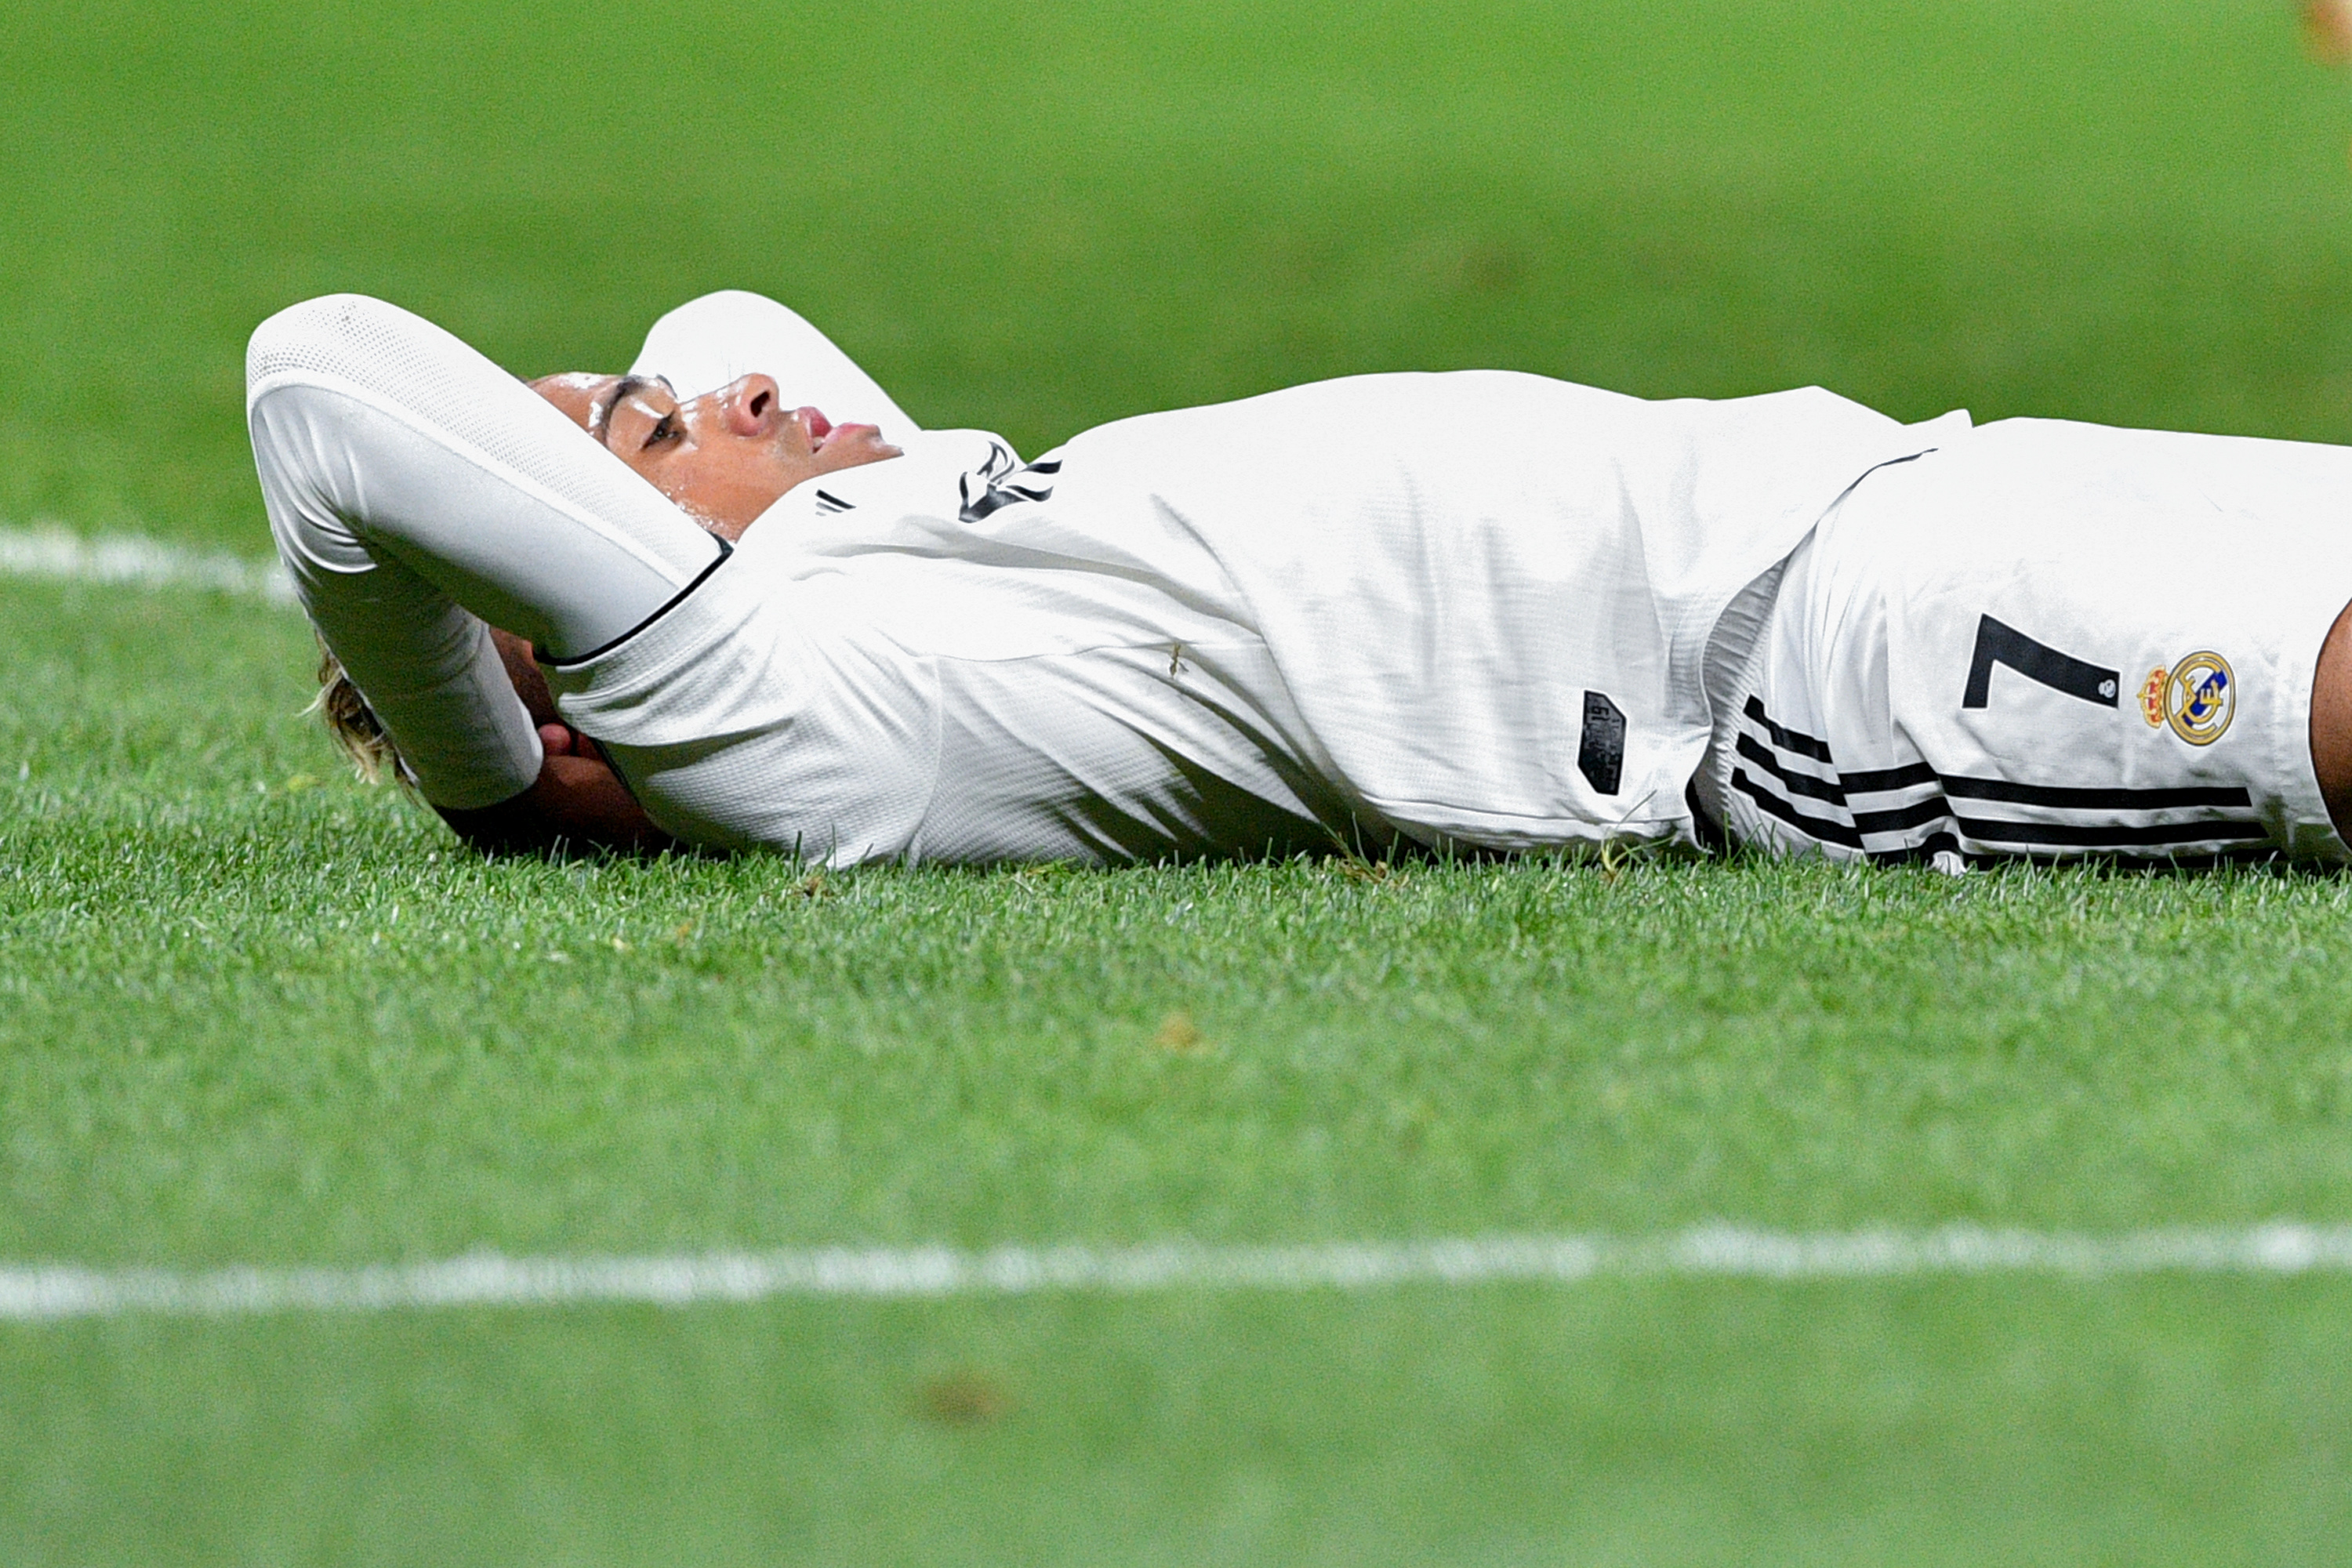 Real Madrid's Spanish-Dominican forward Mariano lies on the pitch during the UEFA Champions League group G football match between PFC CSKA Moscow and Real Madrid CF at the Luzhniki stadium in Moscow on October 2, 2018. (Photo by Mladen ANTONOV / AFP)        (Photo credit should read MLADEN ANTONOV/AFP/Getty Images)